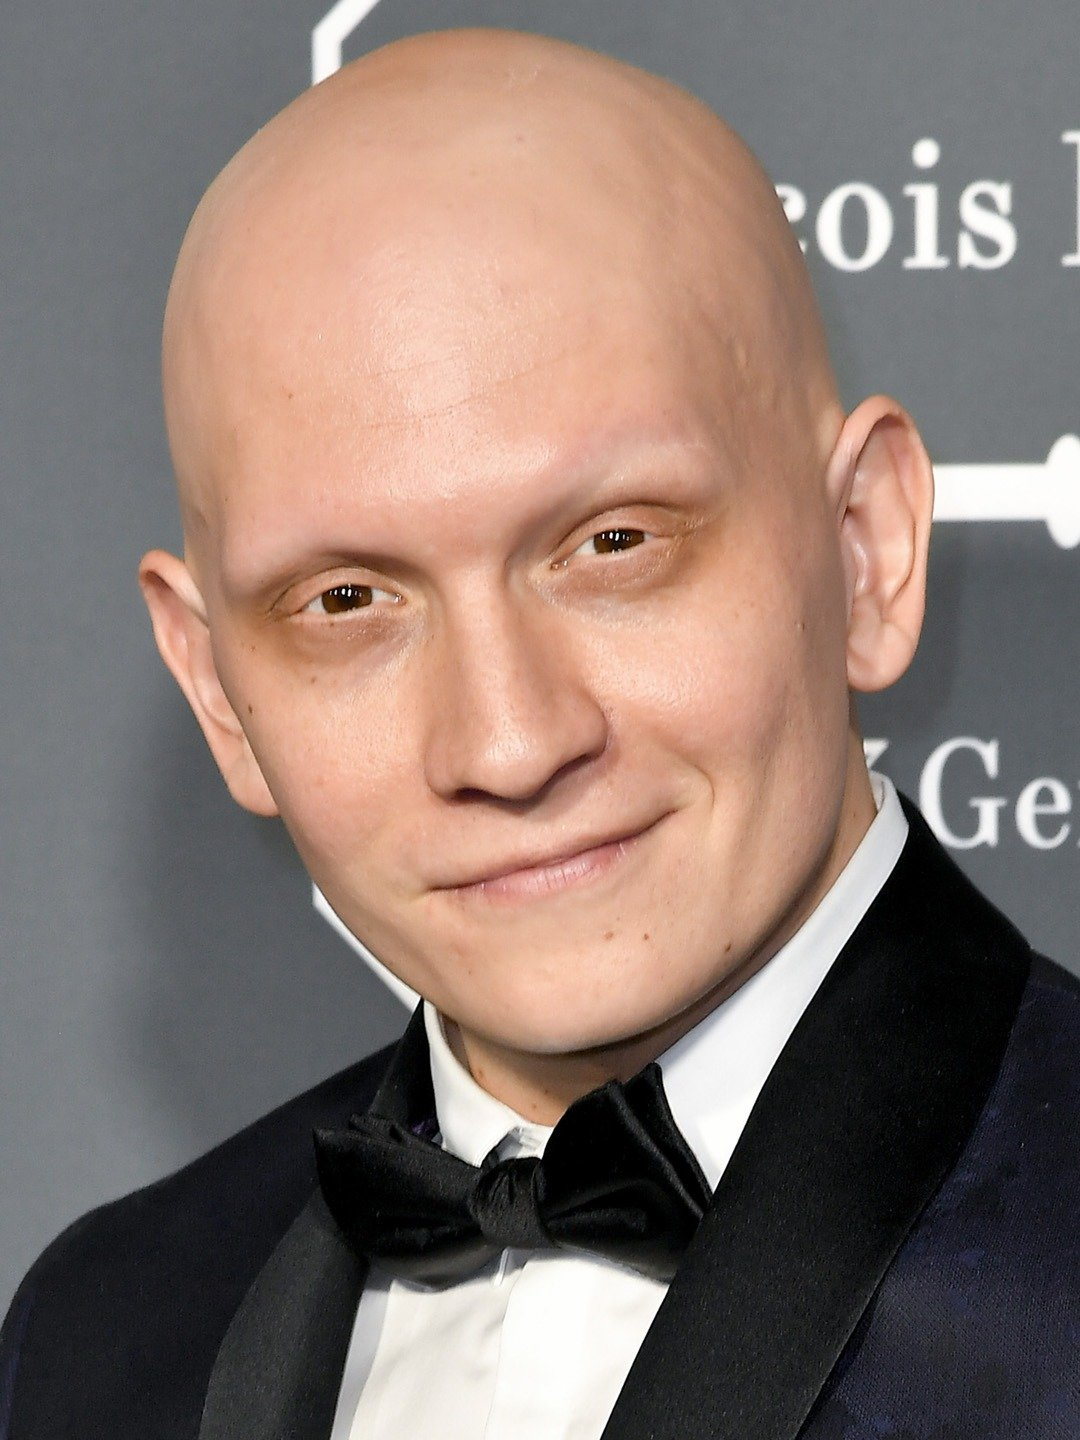 Anthony Carrigan has a health condition called alopecia areata